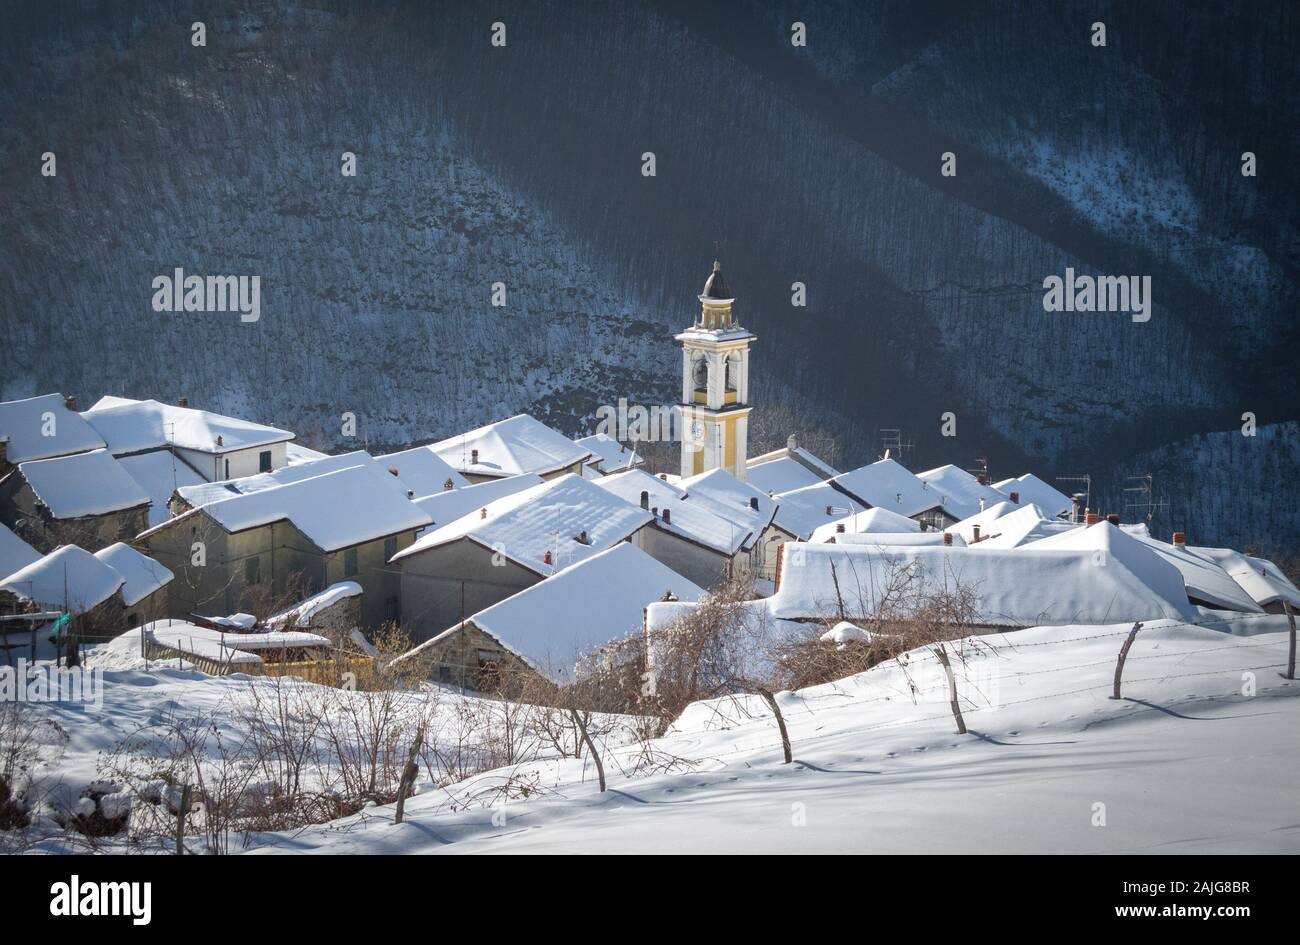 Bertone (Ottone), Piacenza, Italy: Scenic winter view of snow covered picturesque quaint Italian village, church bell tower and fresh snow on rooftops Stock Photo